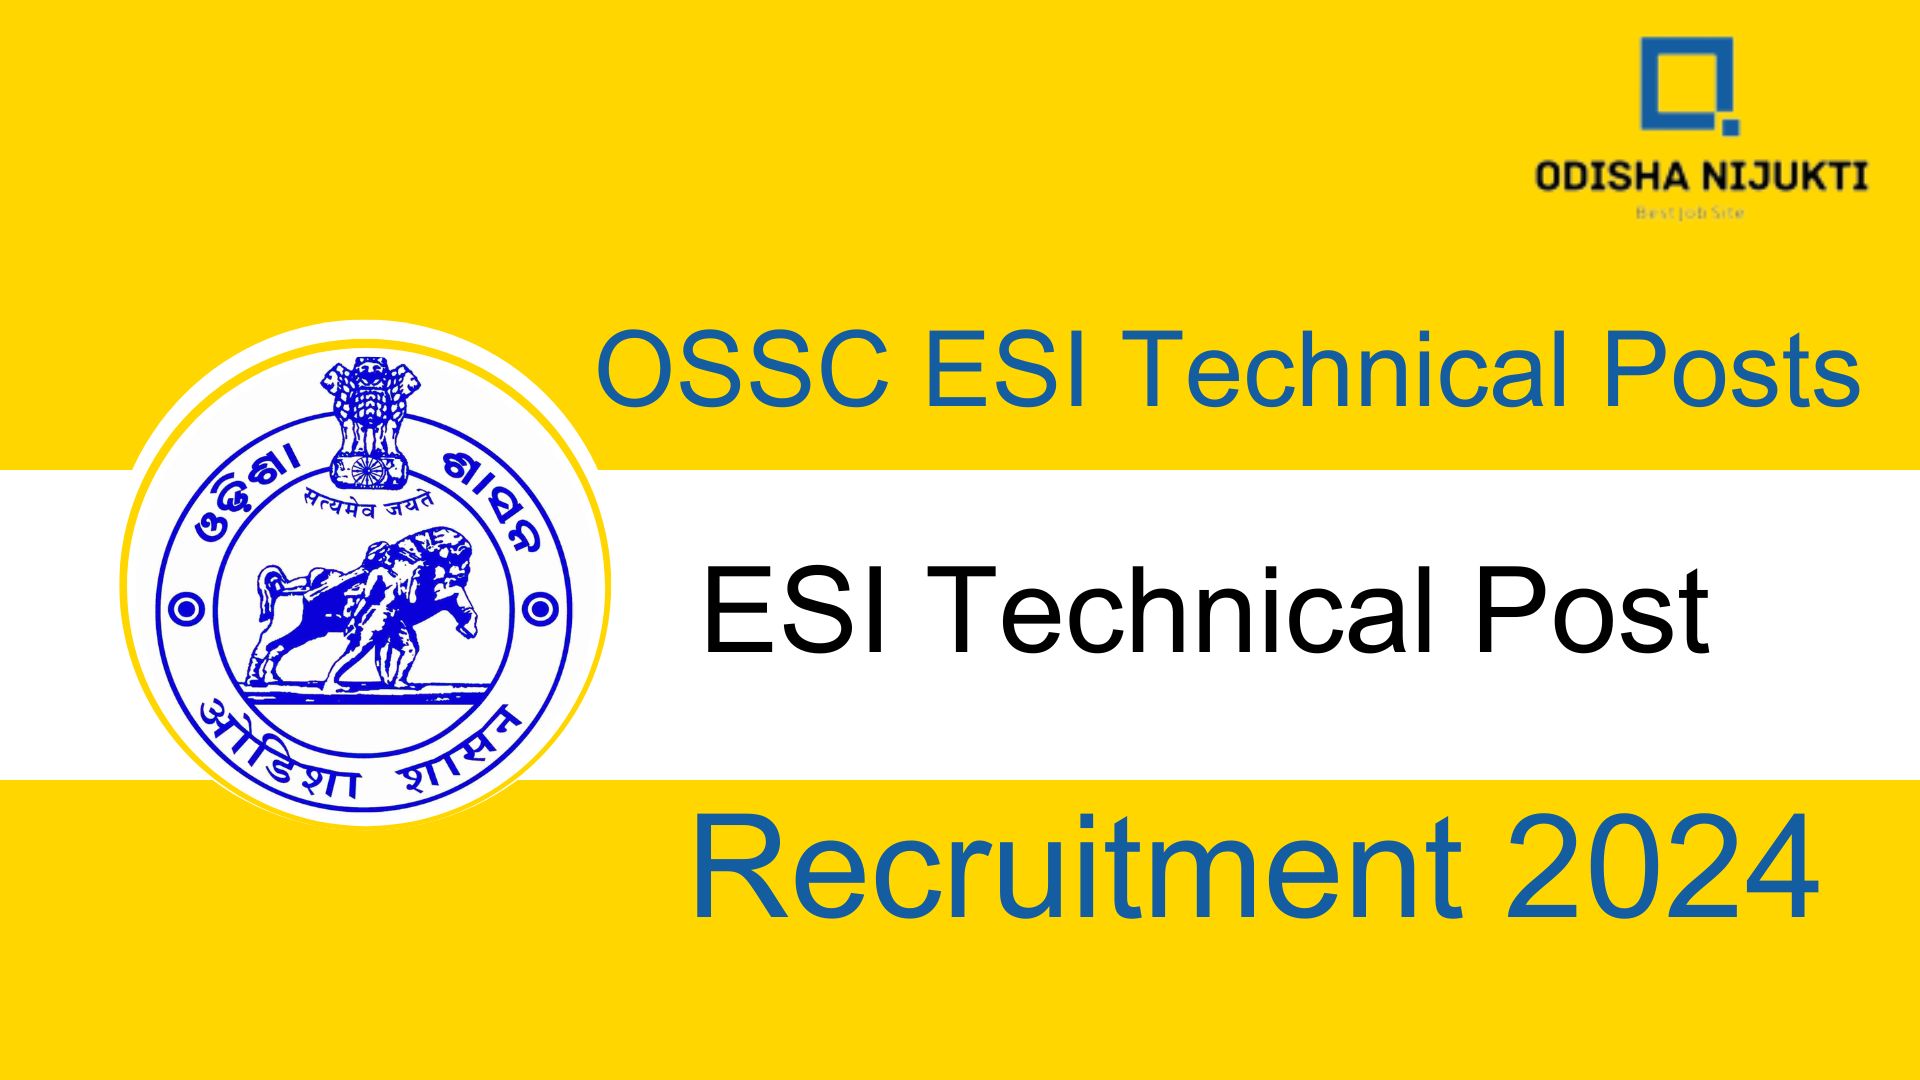 OSSC-ESI-Technical-Posts-Recruitment-2024-Apply-Online-Now-for-Technical-Positions-in-ESI-Scheme